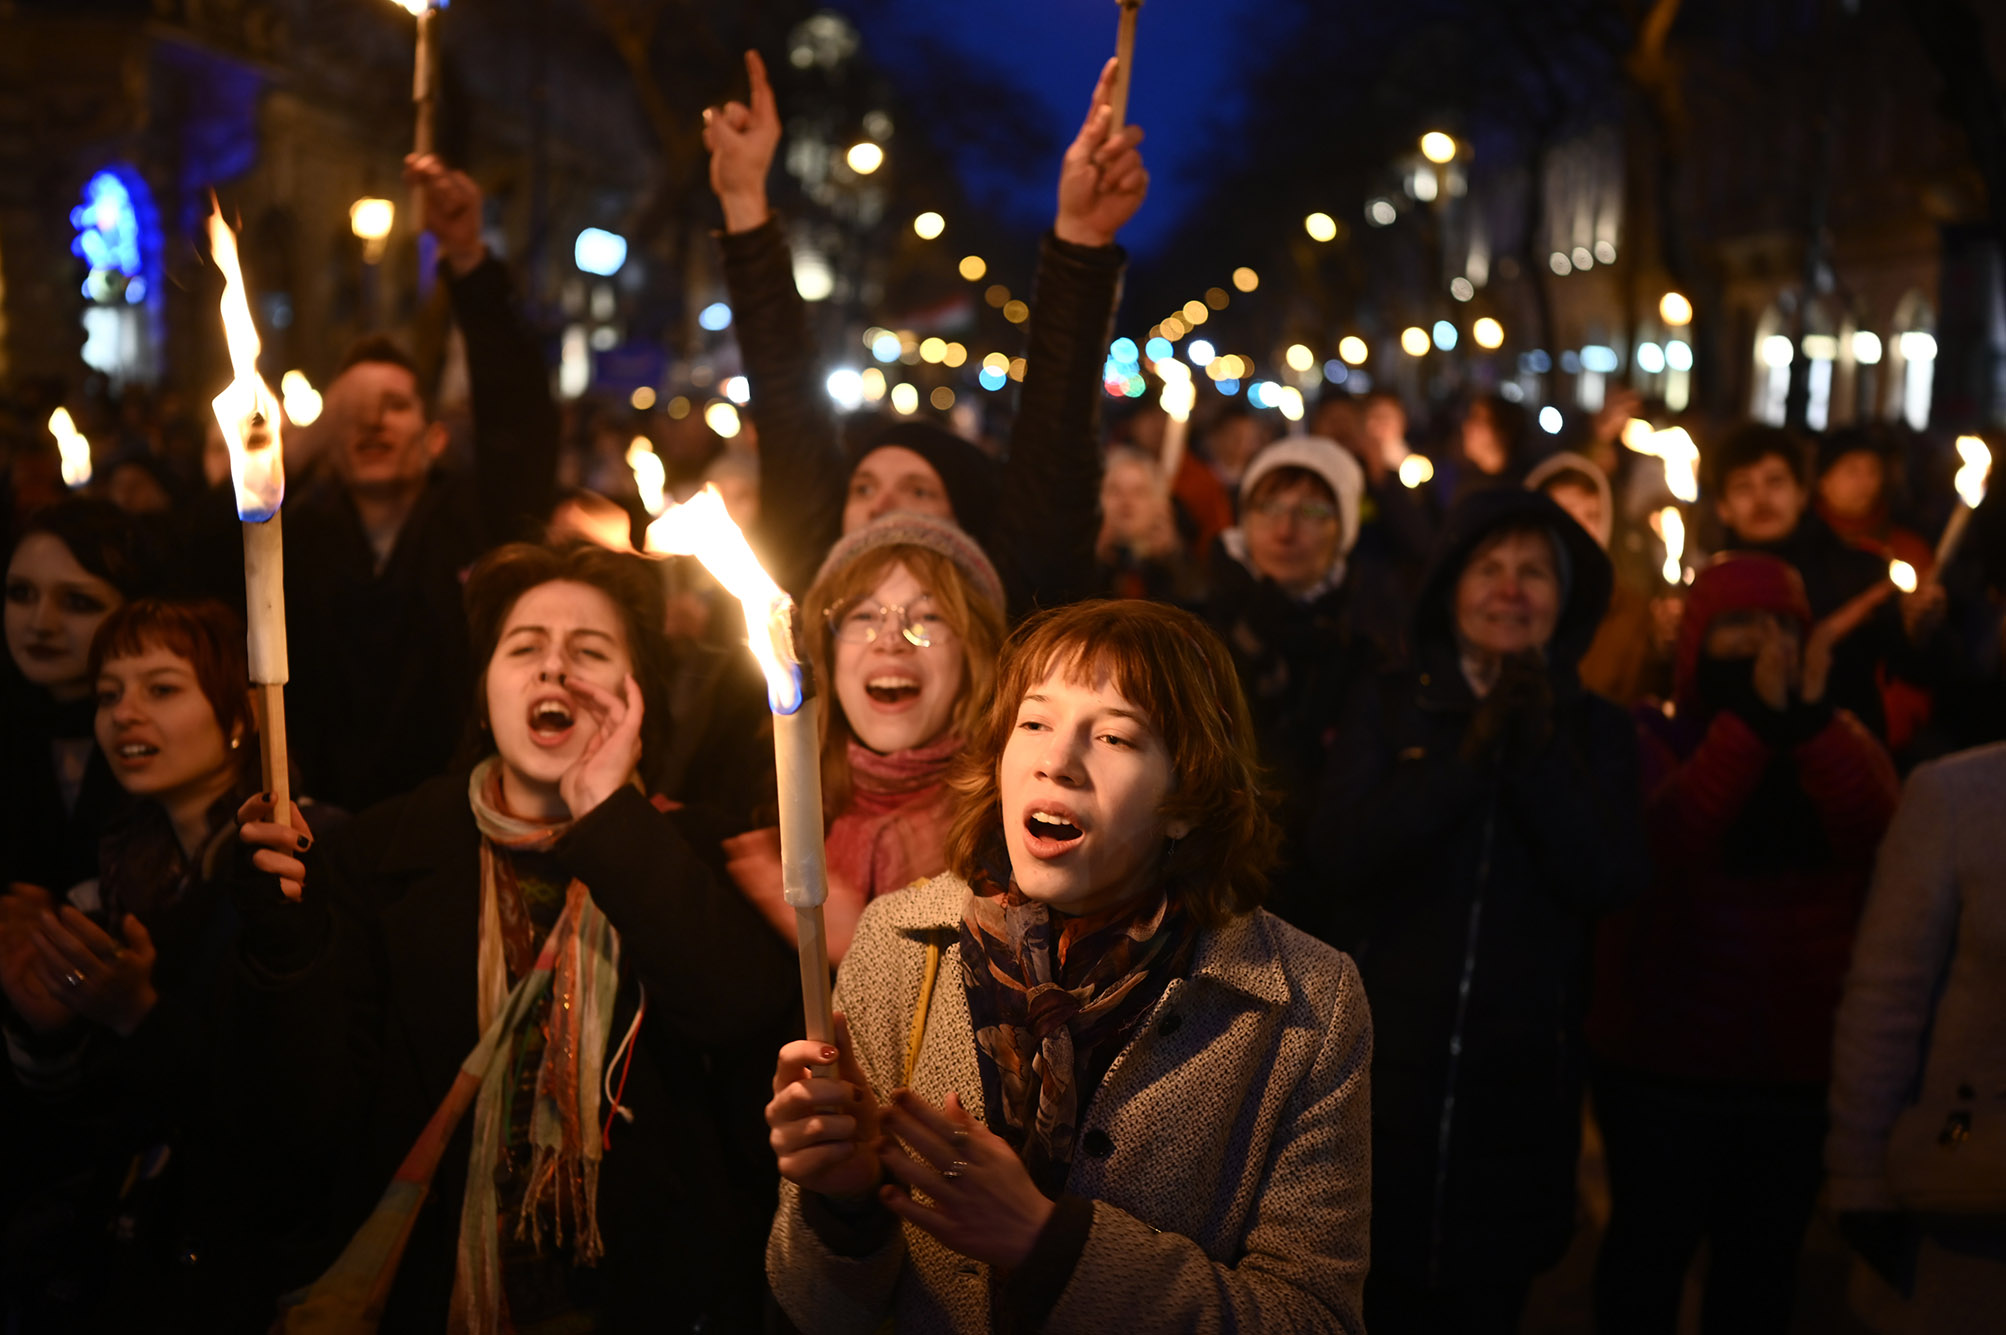 Photo: People hold torches and shouts slogans during a march, marking the 175th anniversary of a failed 1848 uprising, in Budapest, Hungary. the corwd is shown lit mainly by candles and streetlights during the nighttime march.